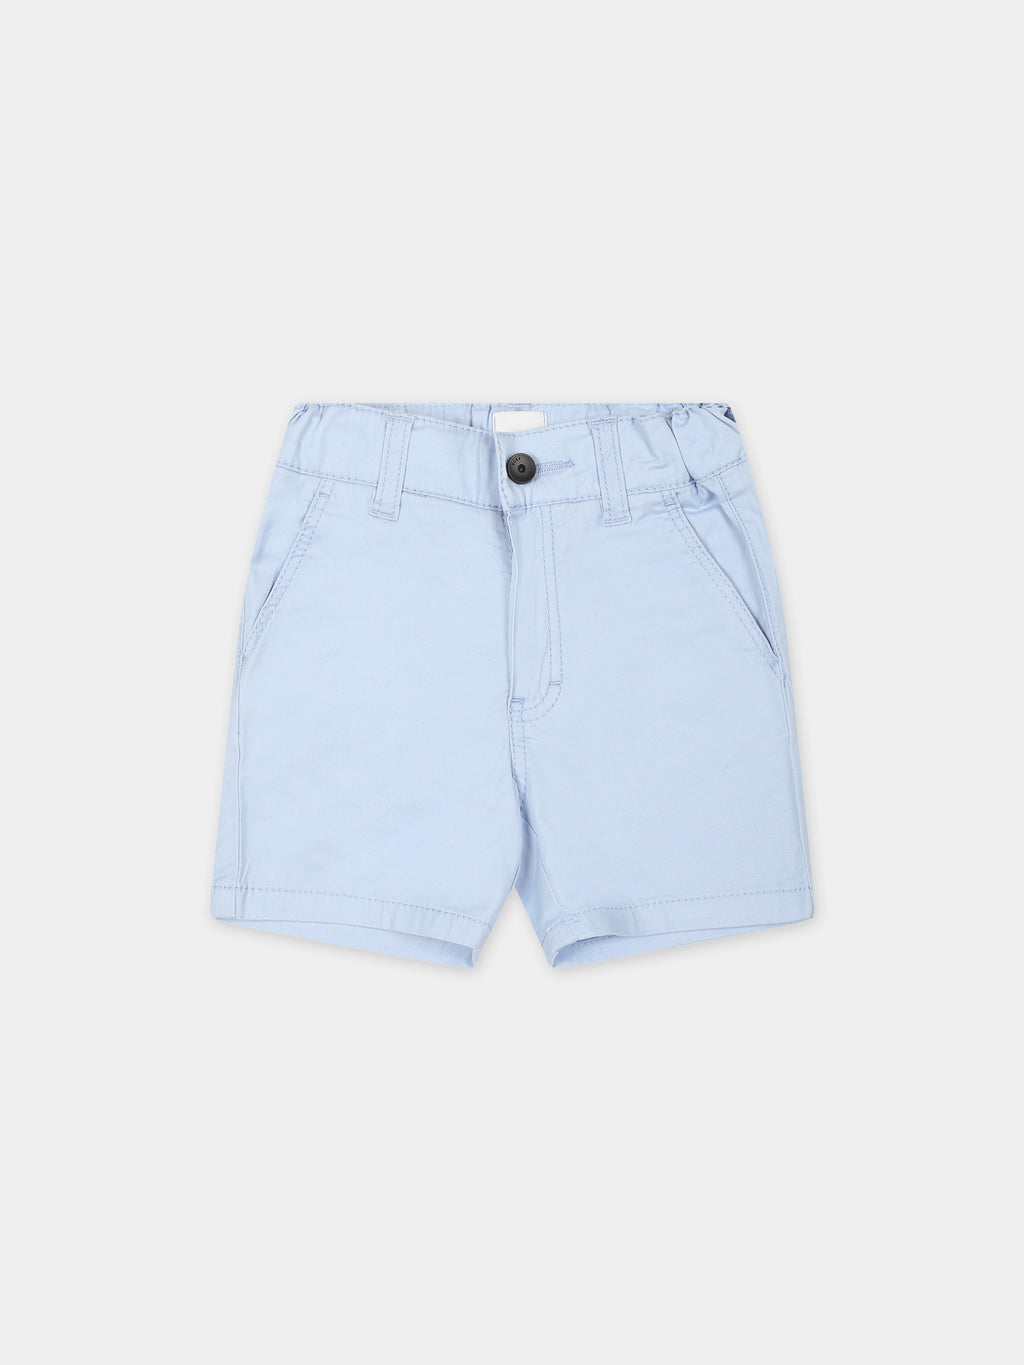 Light blue shorts for baby boy with logo